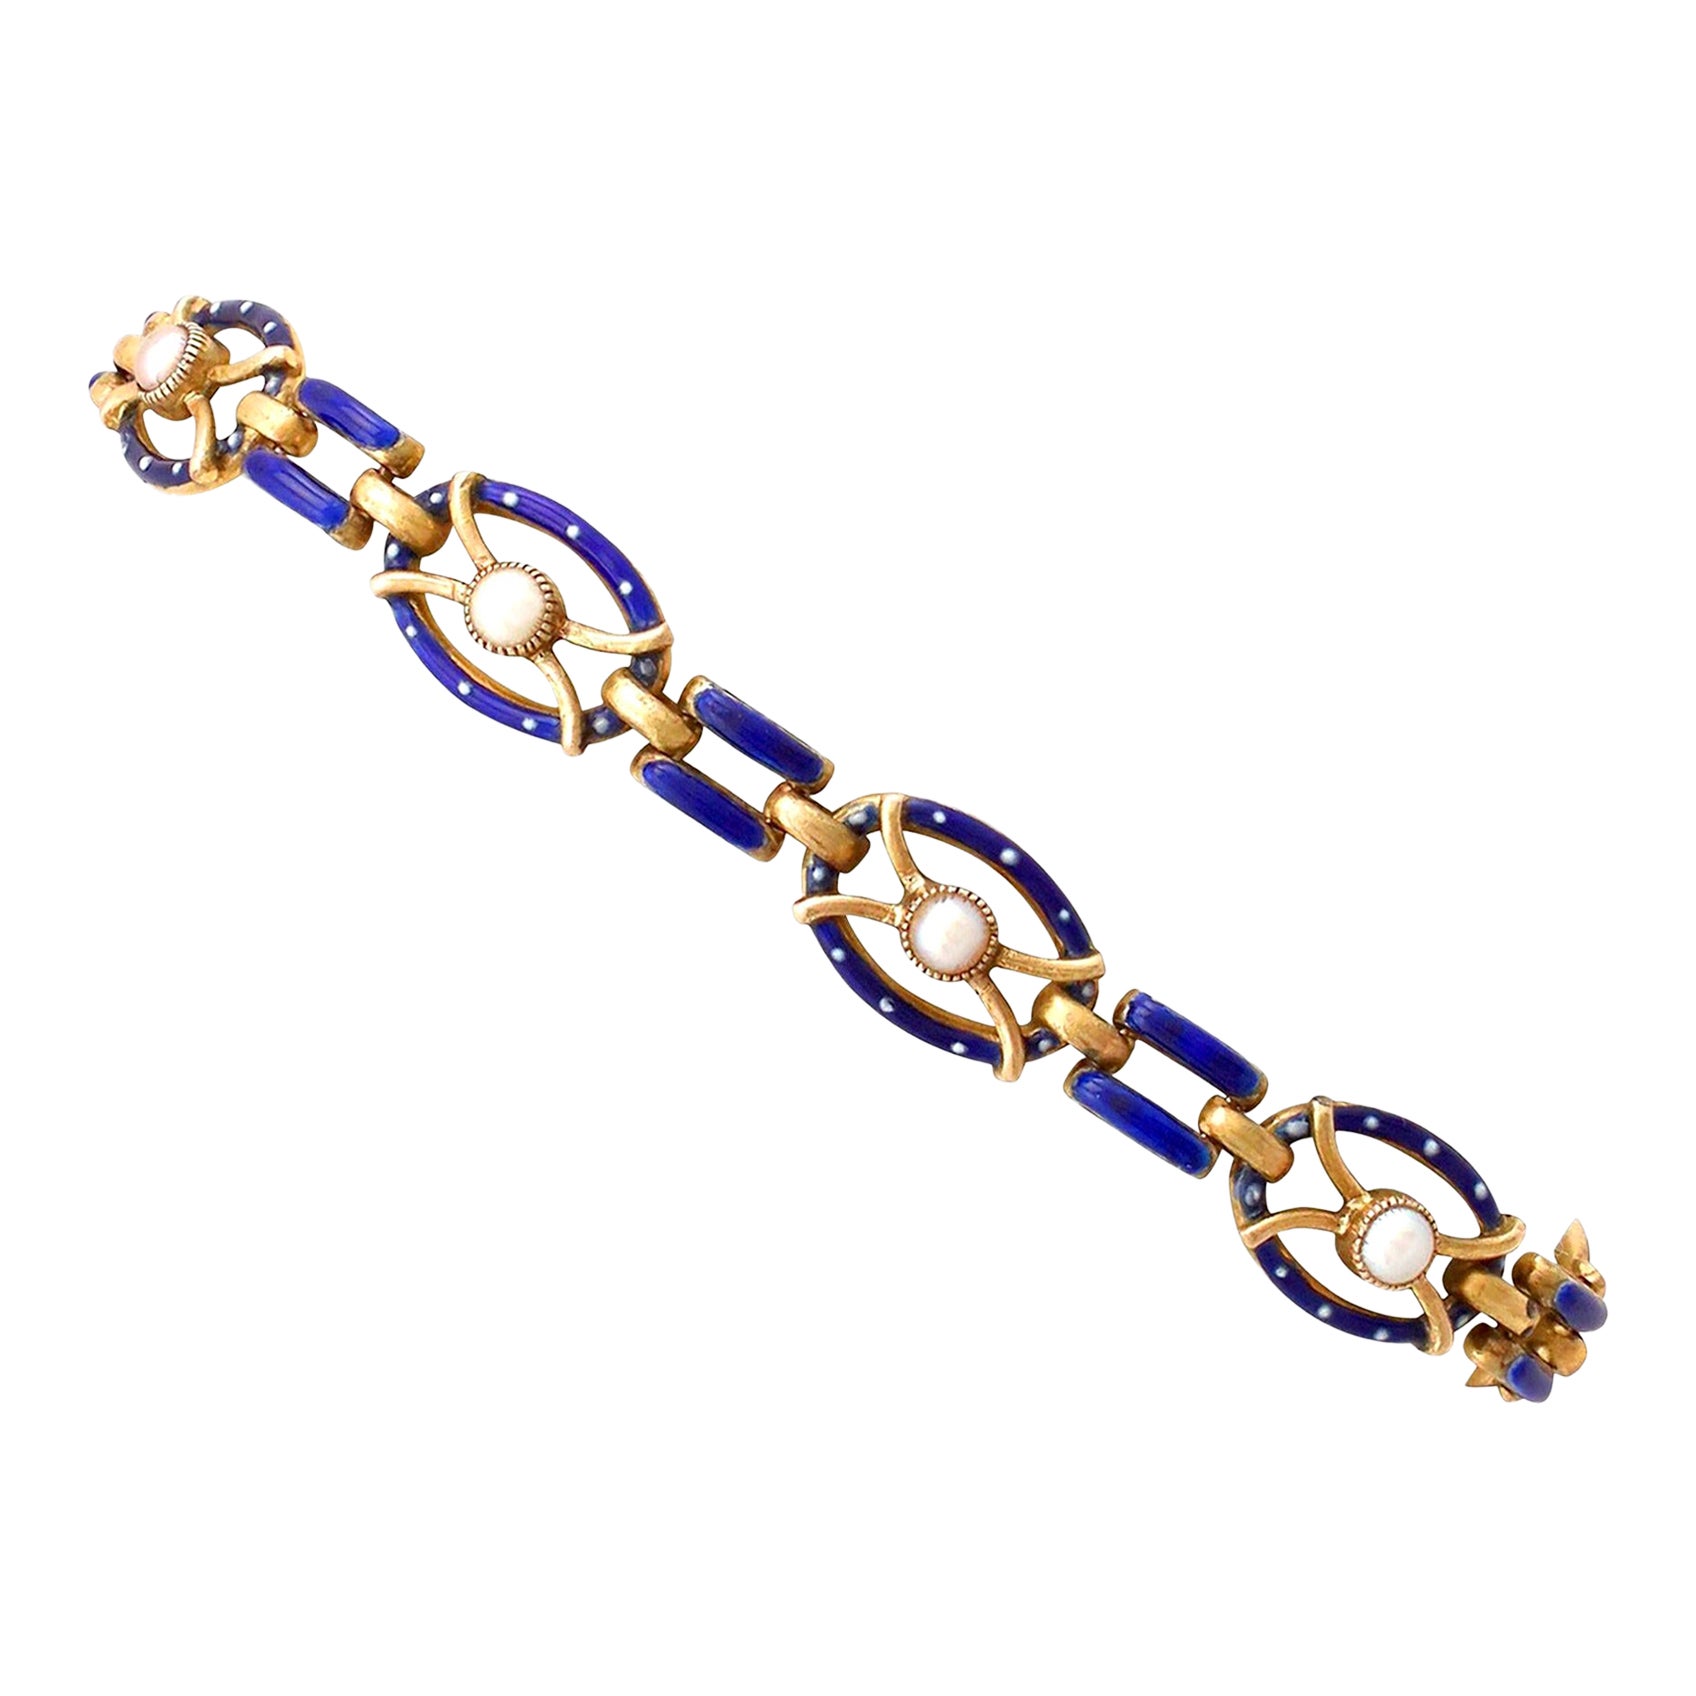 Antique Seed Pearl and Enamel Yellow Gold Gate Bracelet